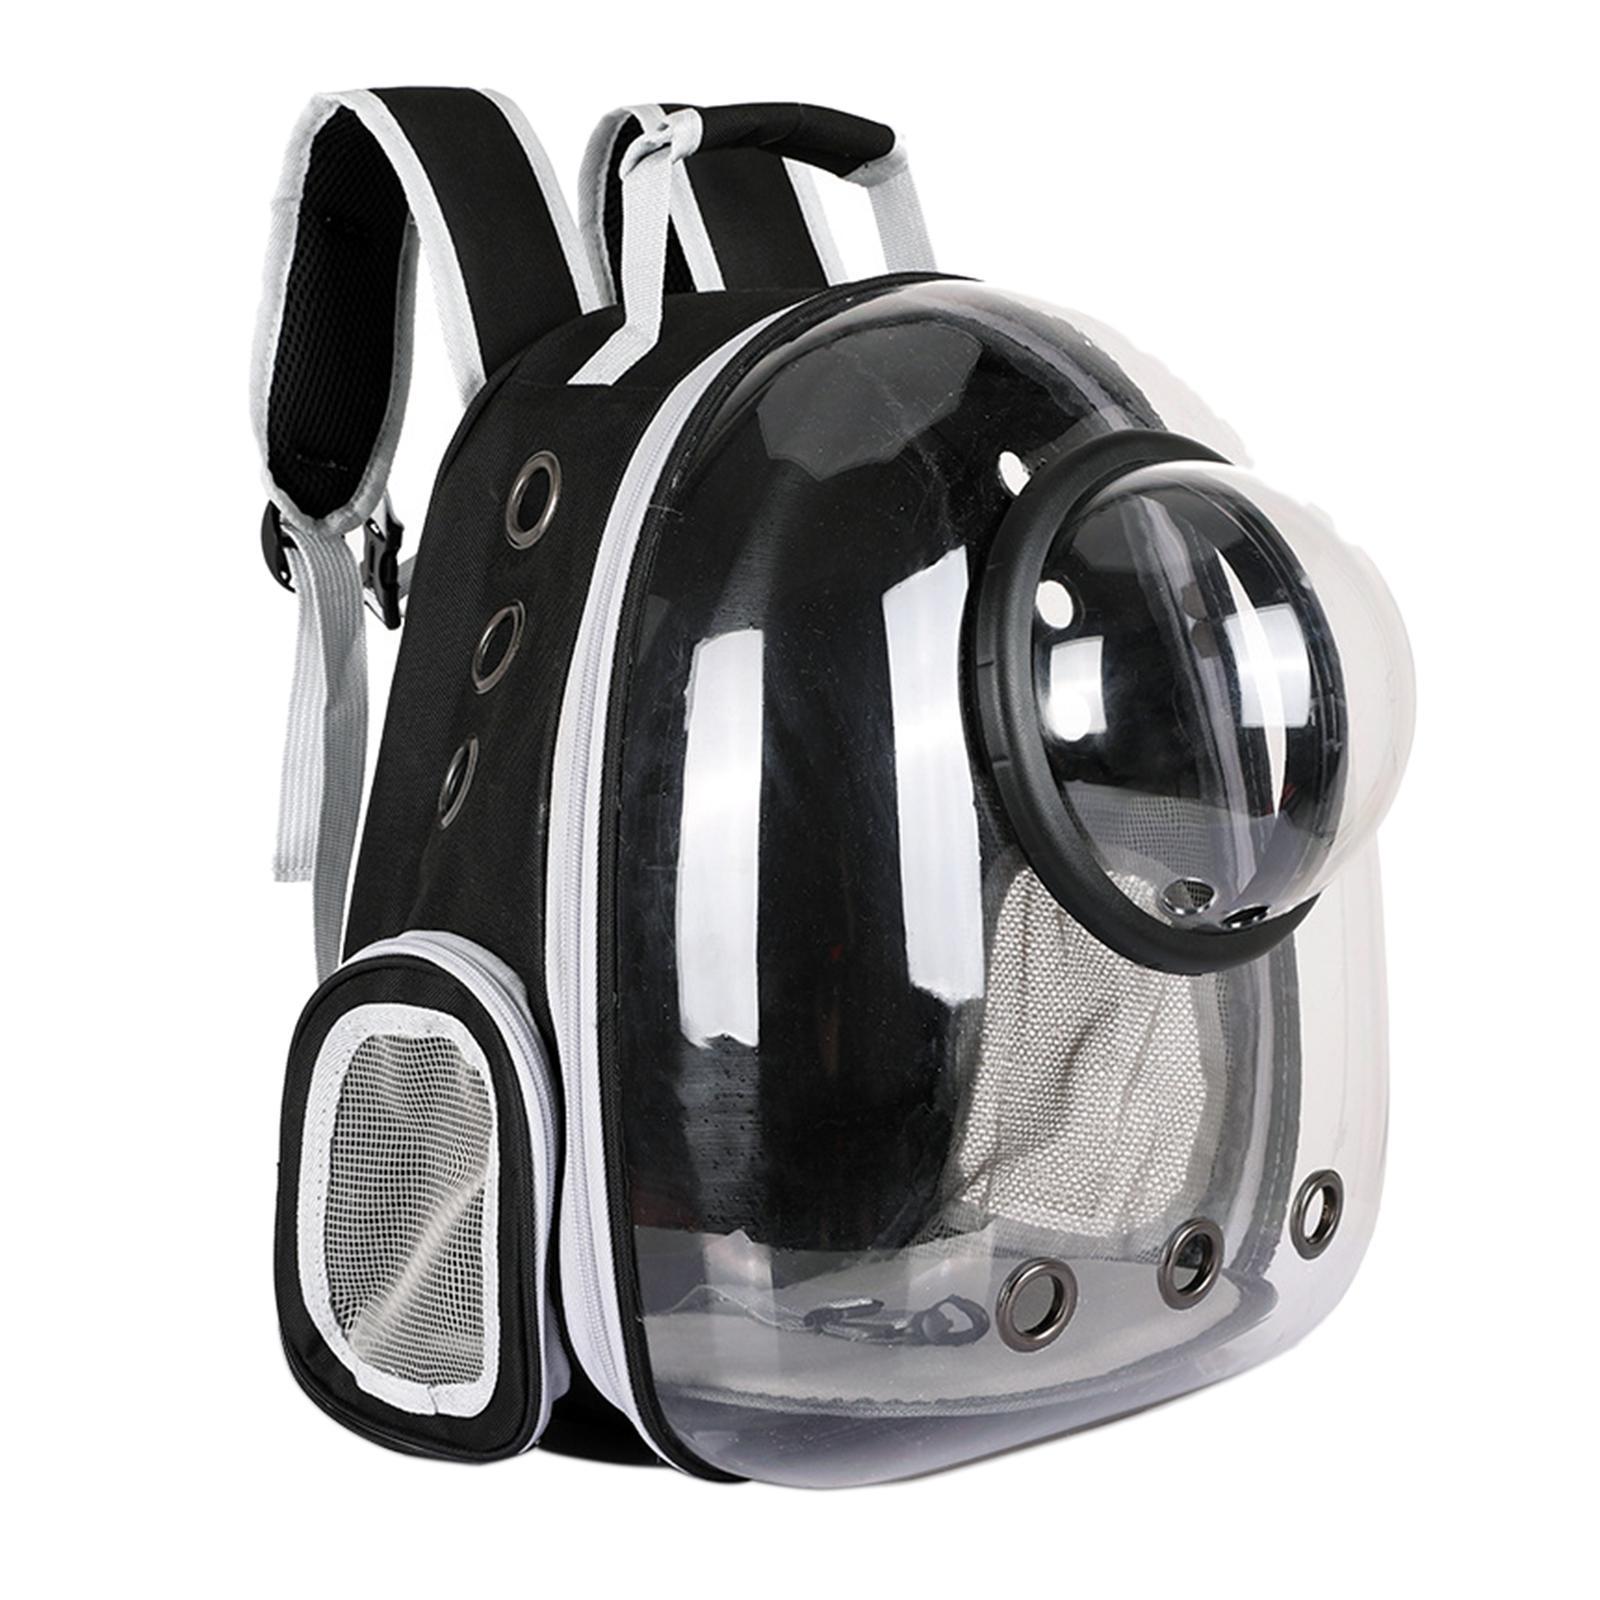 Pet Carrier Backpack Capsule   Breathable Astronaut